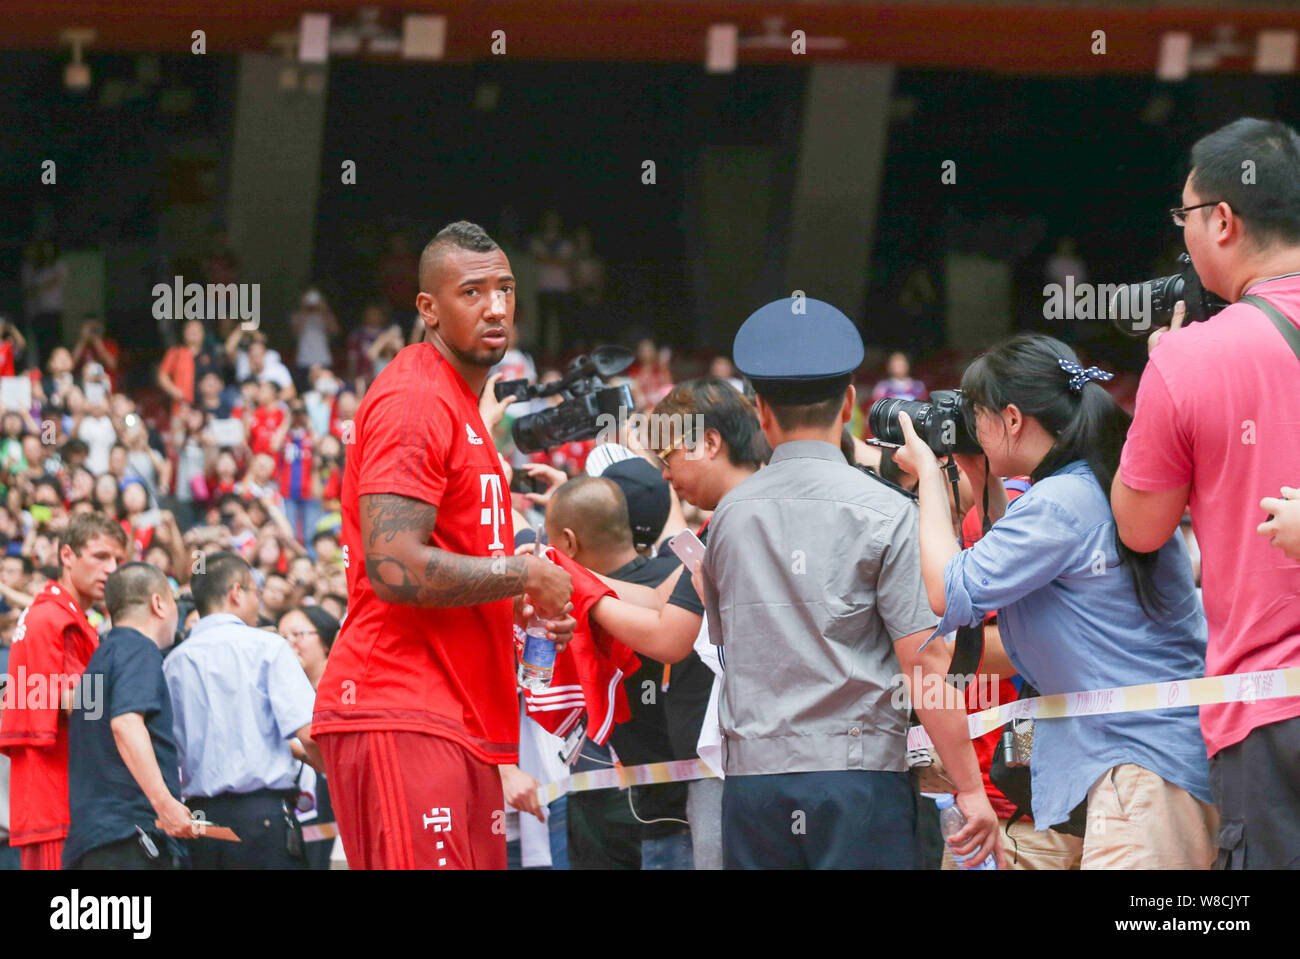 Jerome Boateng of Bayern Munich FC, center, arrives at a training session for the Audi Football Summer Tour China 2015 in Beijing, China, 17 July 2015 Stock Photo